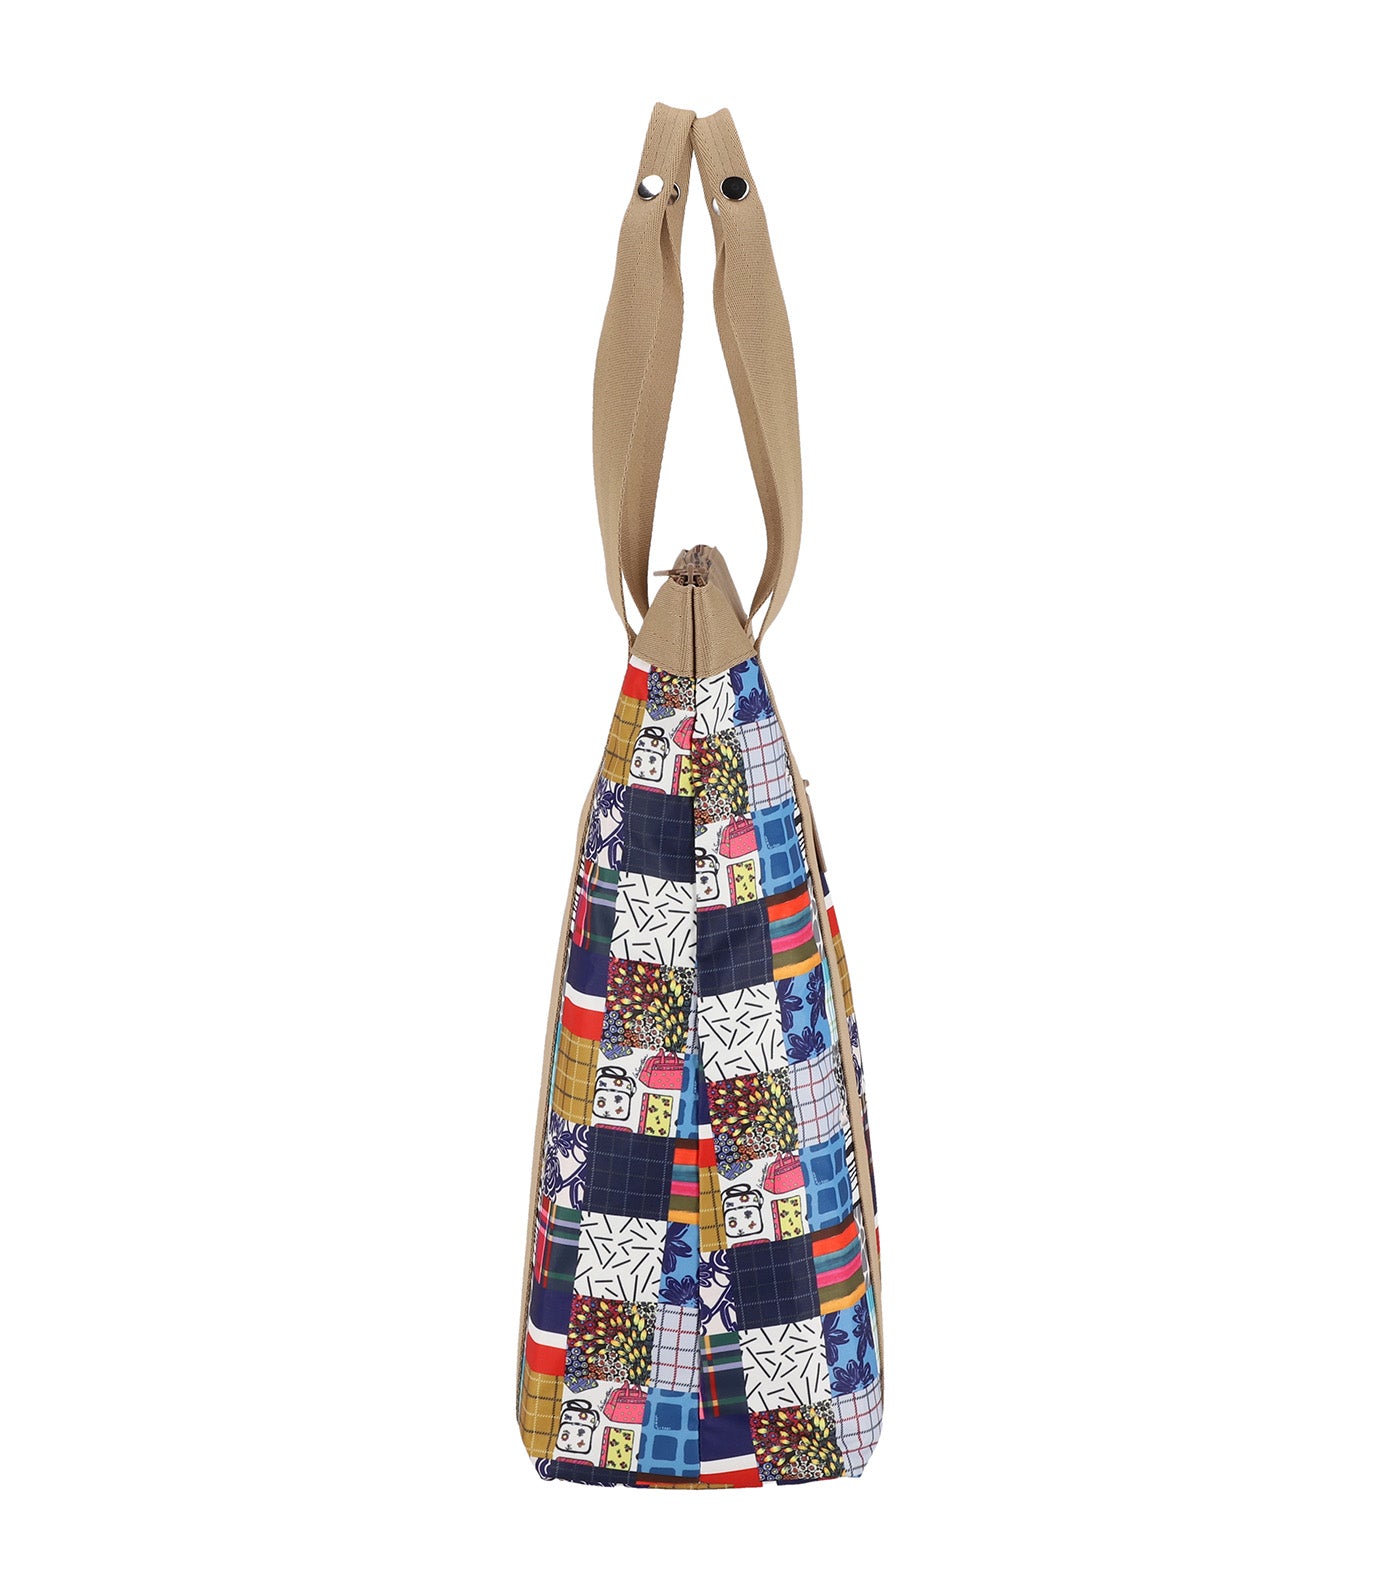 North/South Zip Tote Bag 50th Grid Patchwork